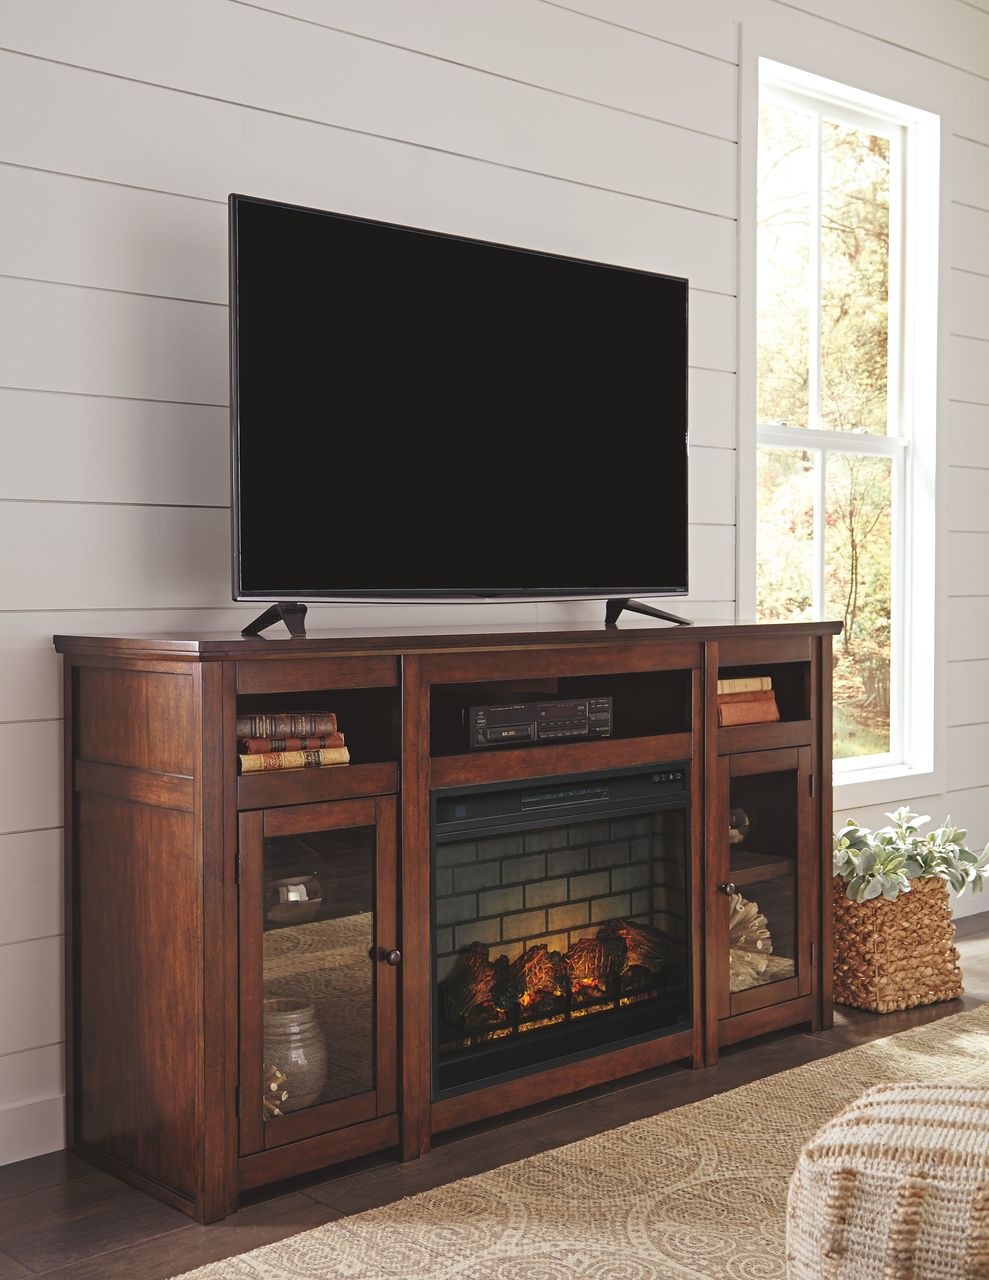 Ashley Fireplace Tv Stand Awesome ashley Harpan Reddish Brown Xl Tv Stand with Lg Fireplace Insert Infrared